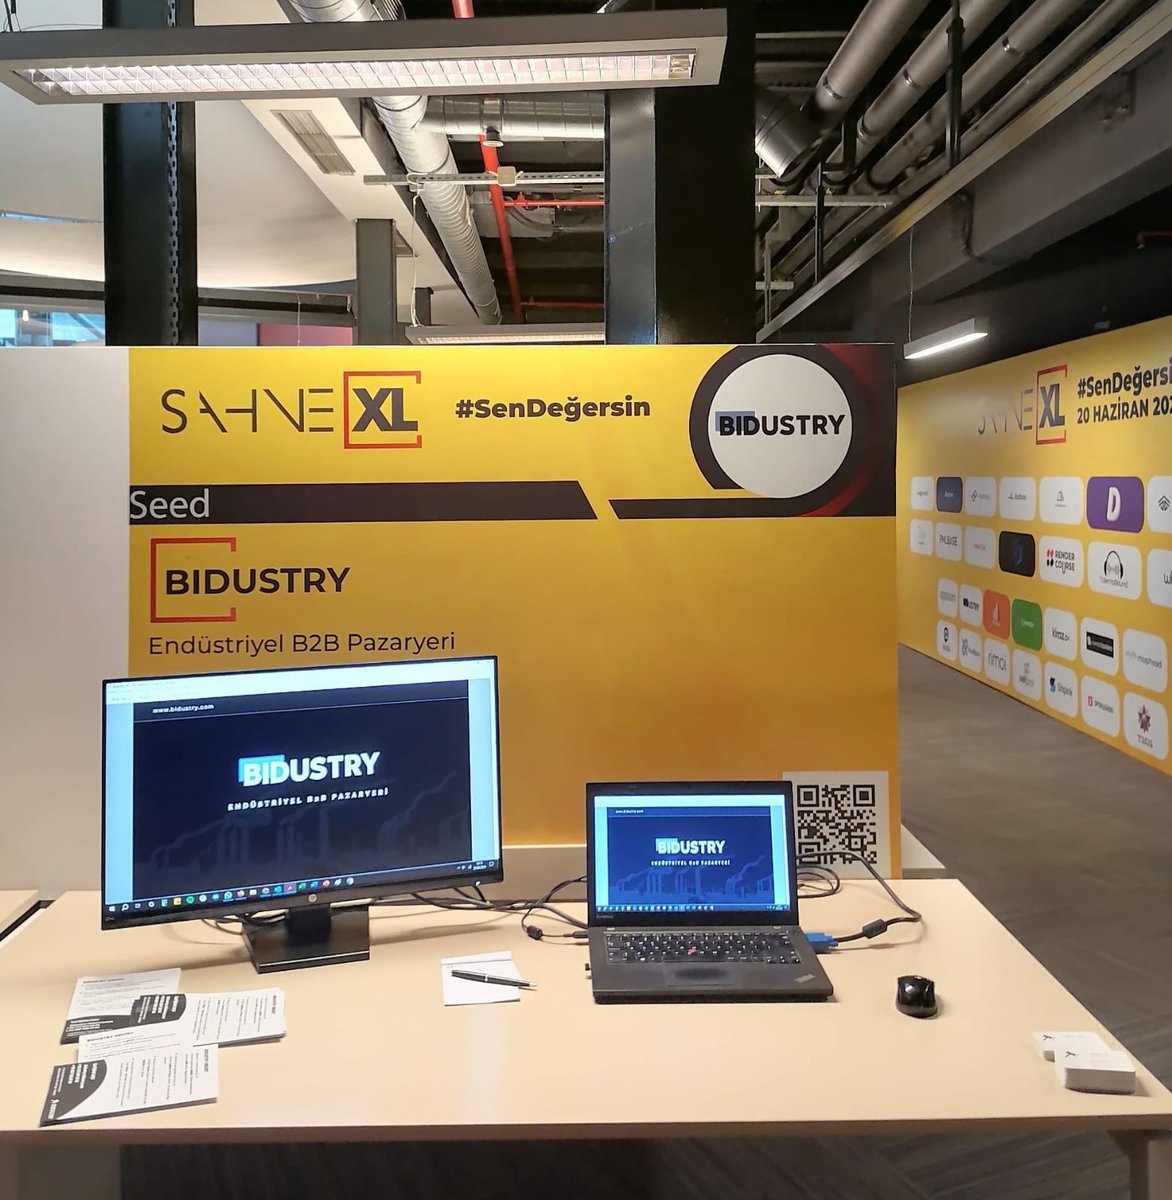 Today, Bidustry is at @btmistanbul - SahneXL, next to promising startups. 🚀

While they are pitching at the stage, we are talking about how Bidustry connects industrial sellers and buyers at our desk. ☕

To join: lnkd.in/eE6ESE6

#bidustry #btm #b2bmarketplace